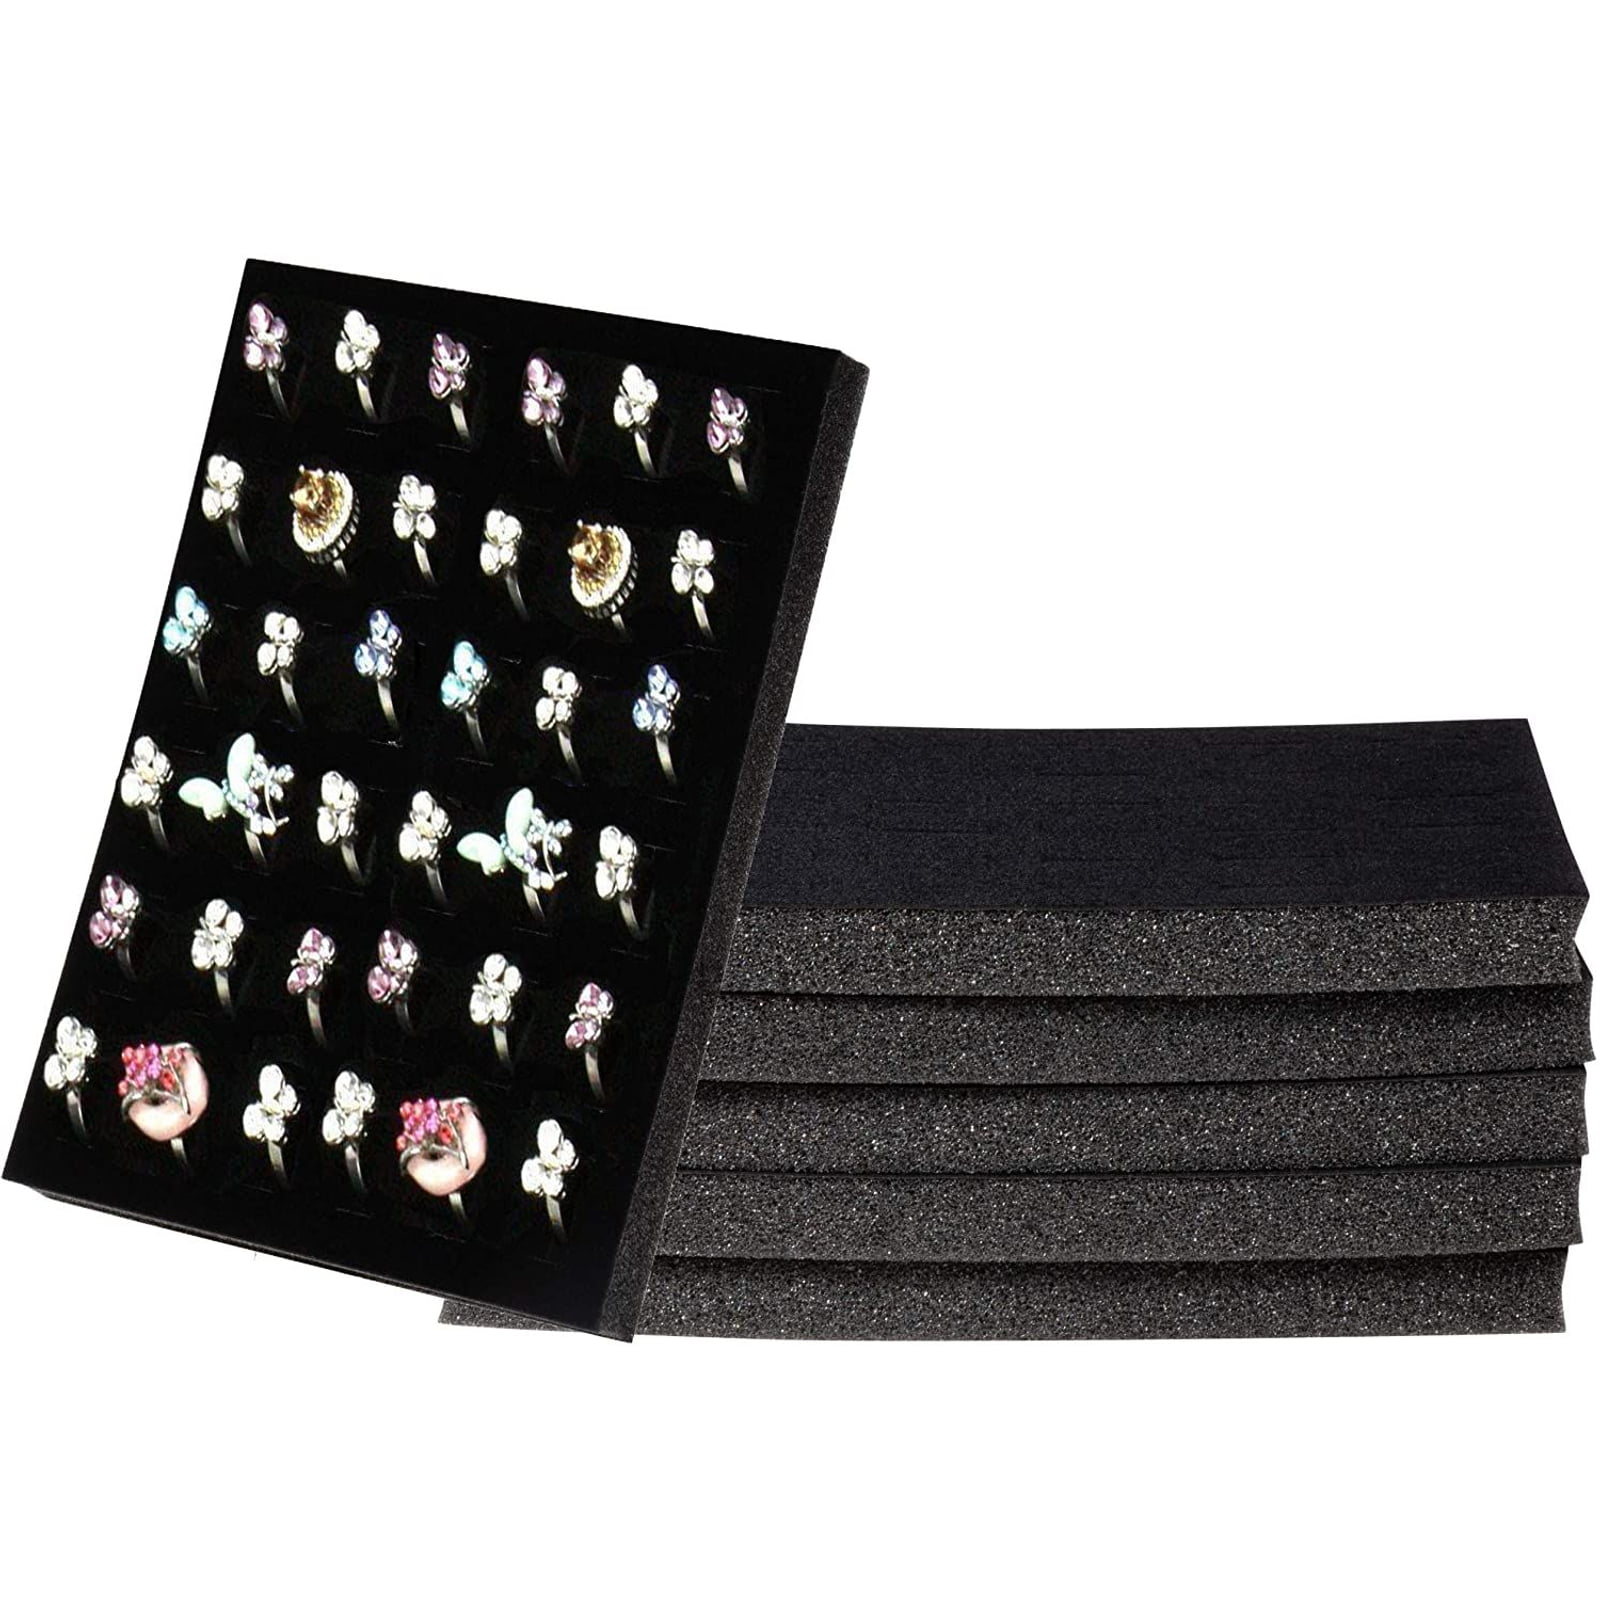 LARGE VELVET JEWELRY TRAY LINER CASE LINER DISPLAY PAD FOR CASES CASE PAD INSERT 